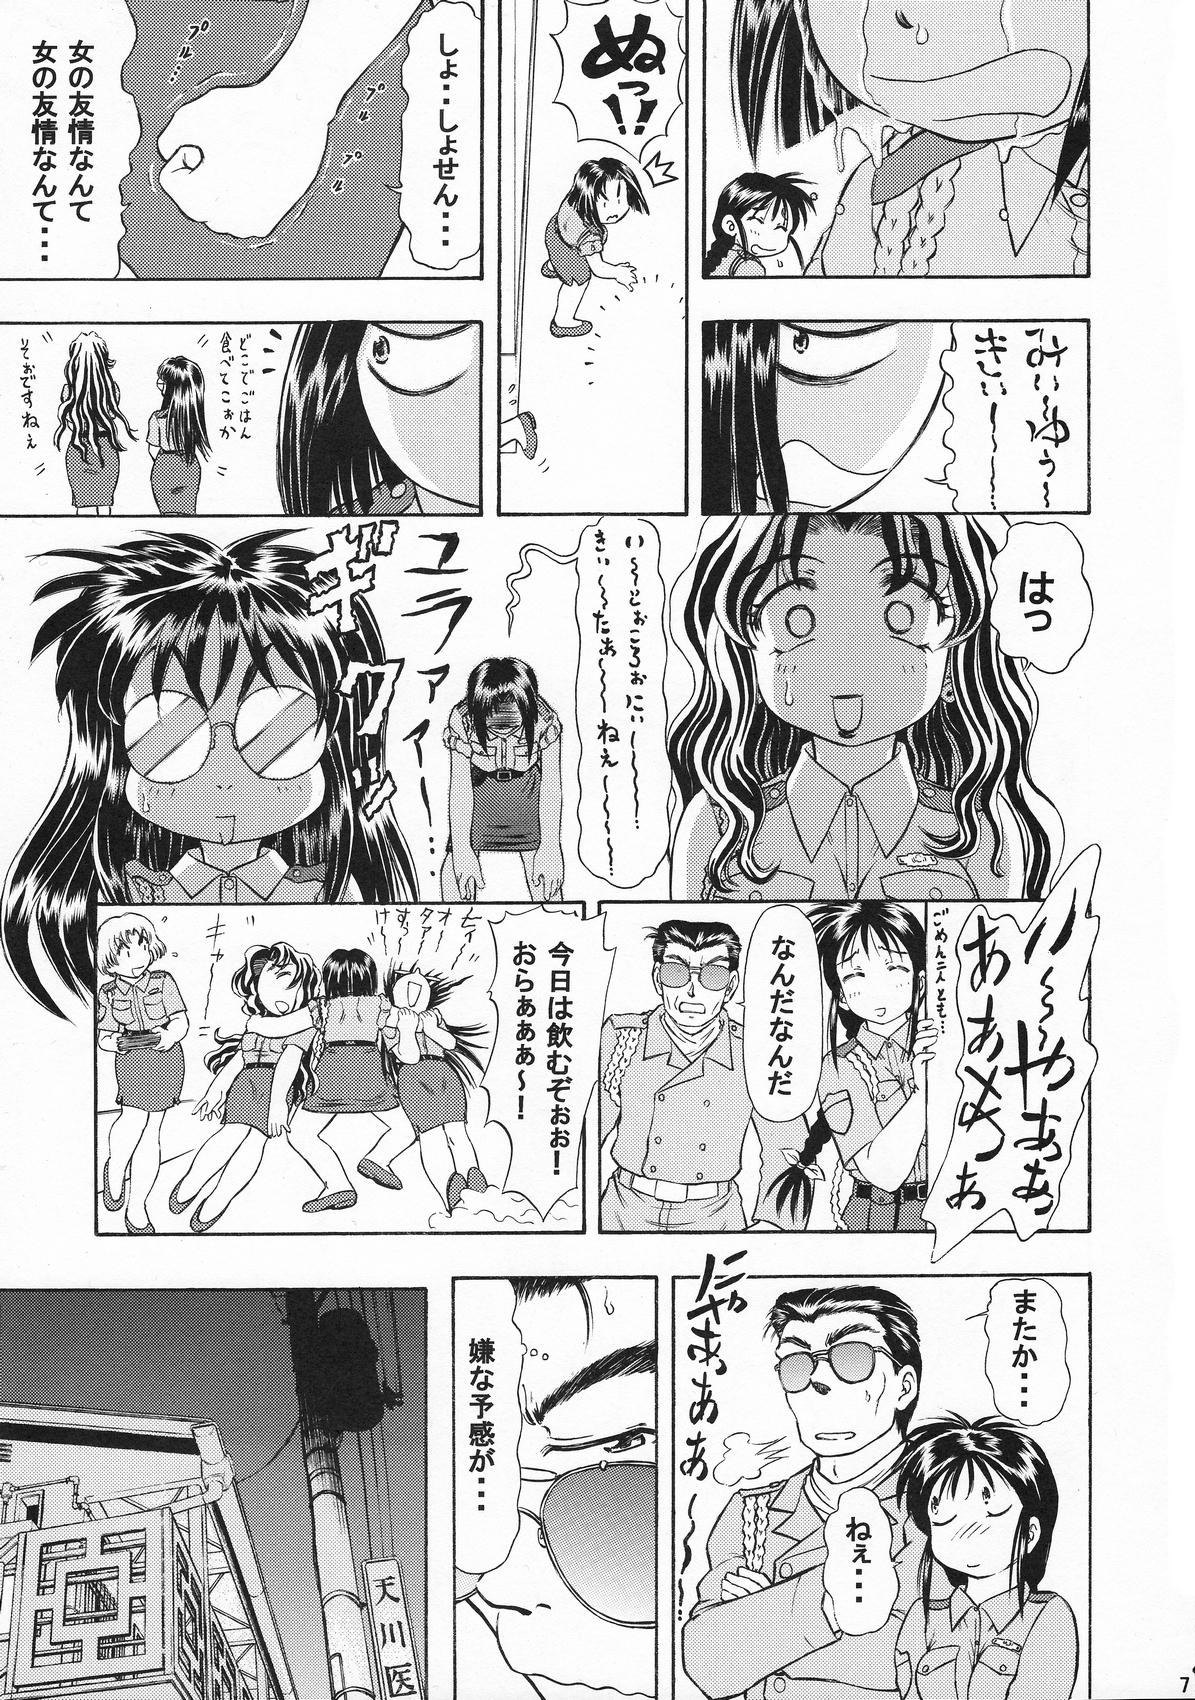 Dicksucking Taiho+2 - Youre under arrest Amateurs - Page 6